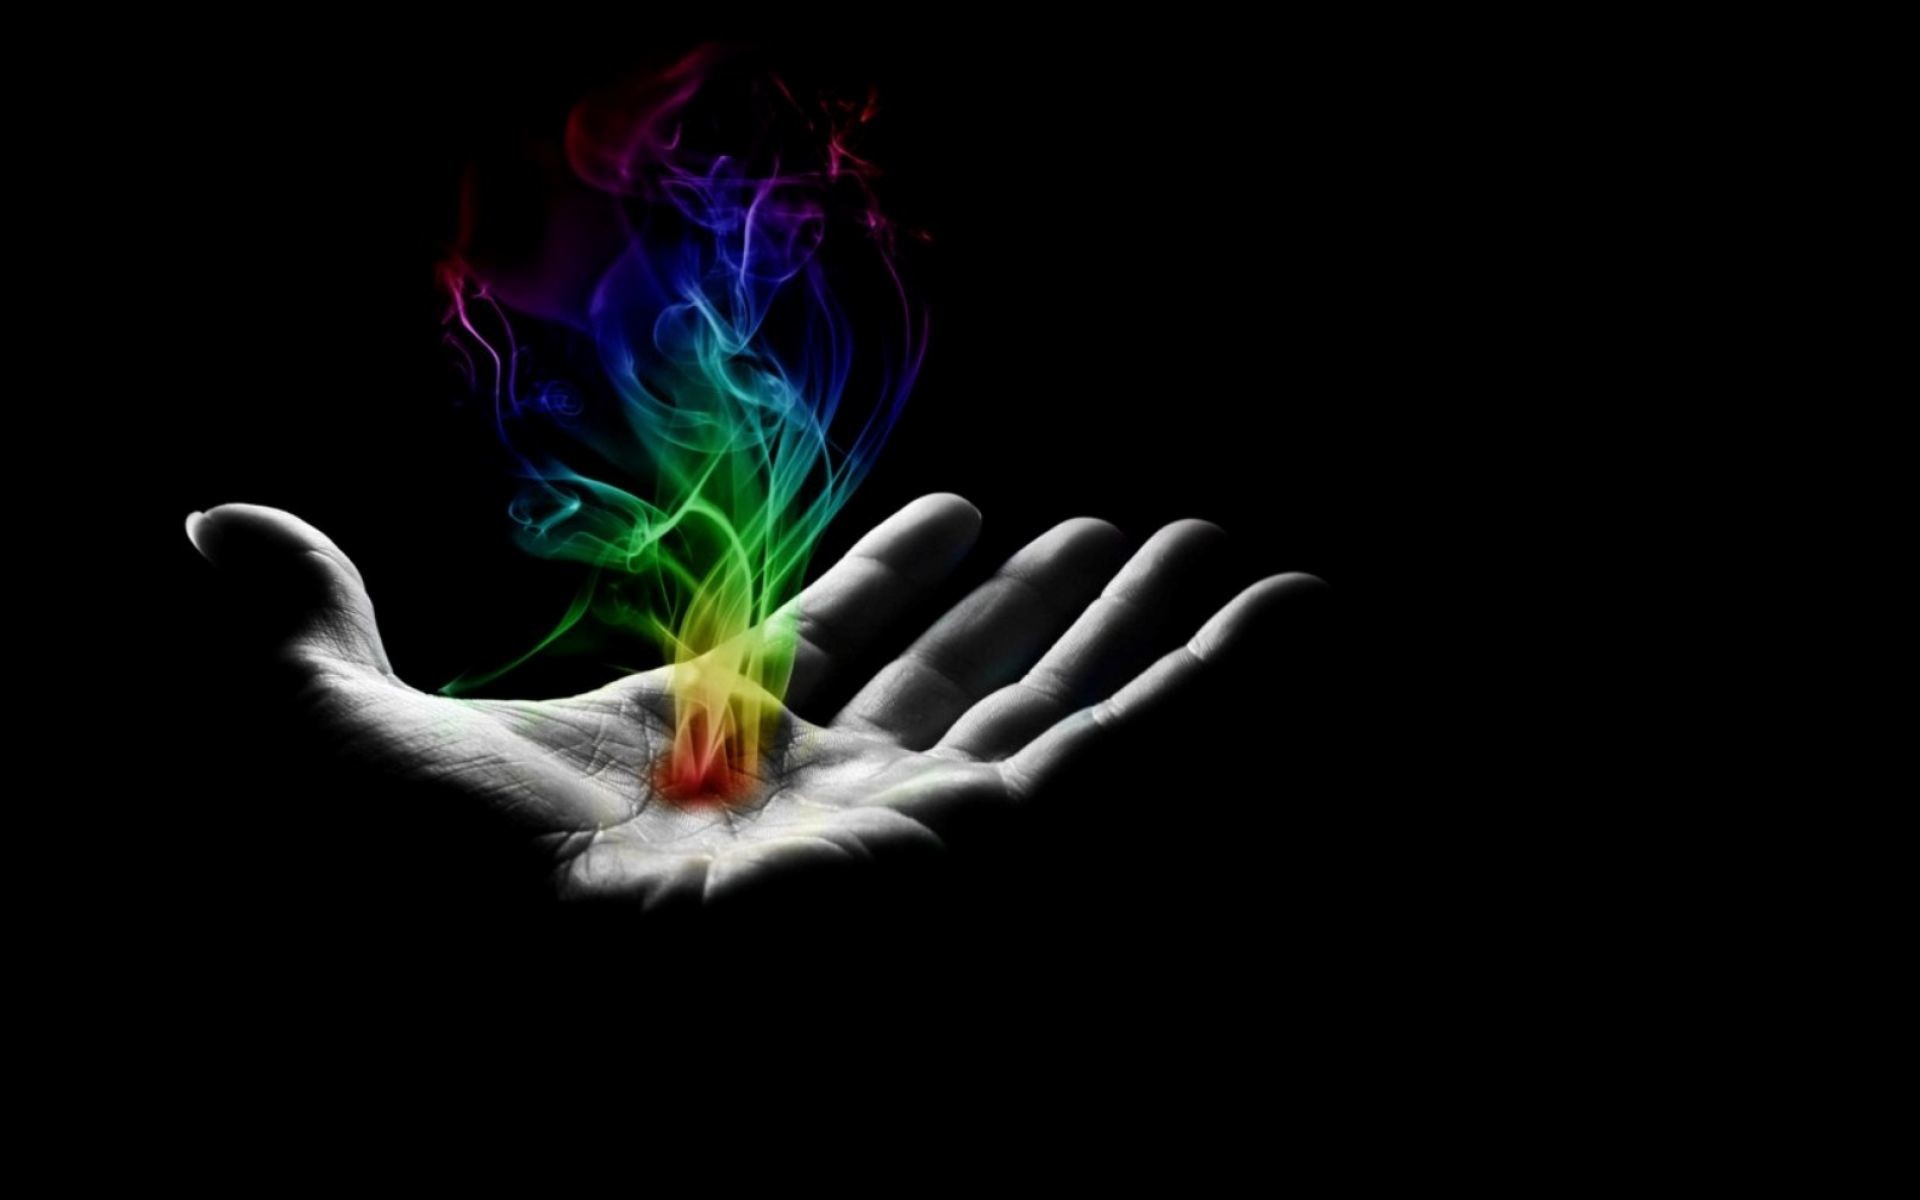 1920x1200 9/3d-magical-hand-with-color-smoke-wallpaper.jpg  1200x/wp-content/uploads/HTML/Magical-wallpaper-hd-66.html